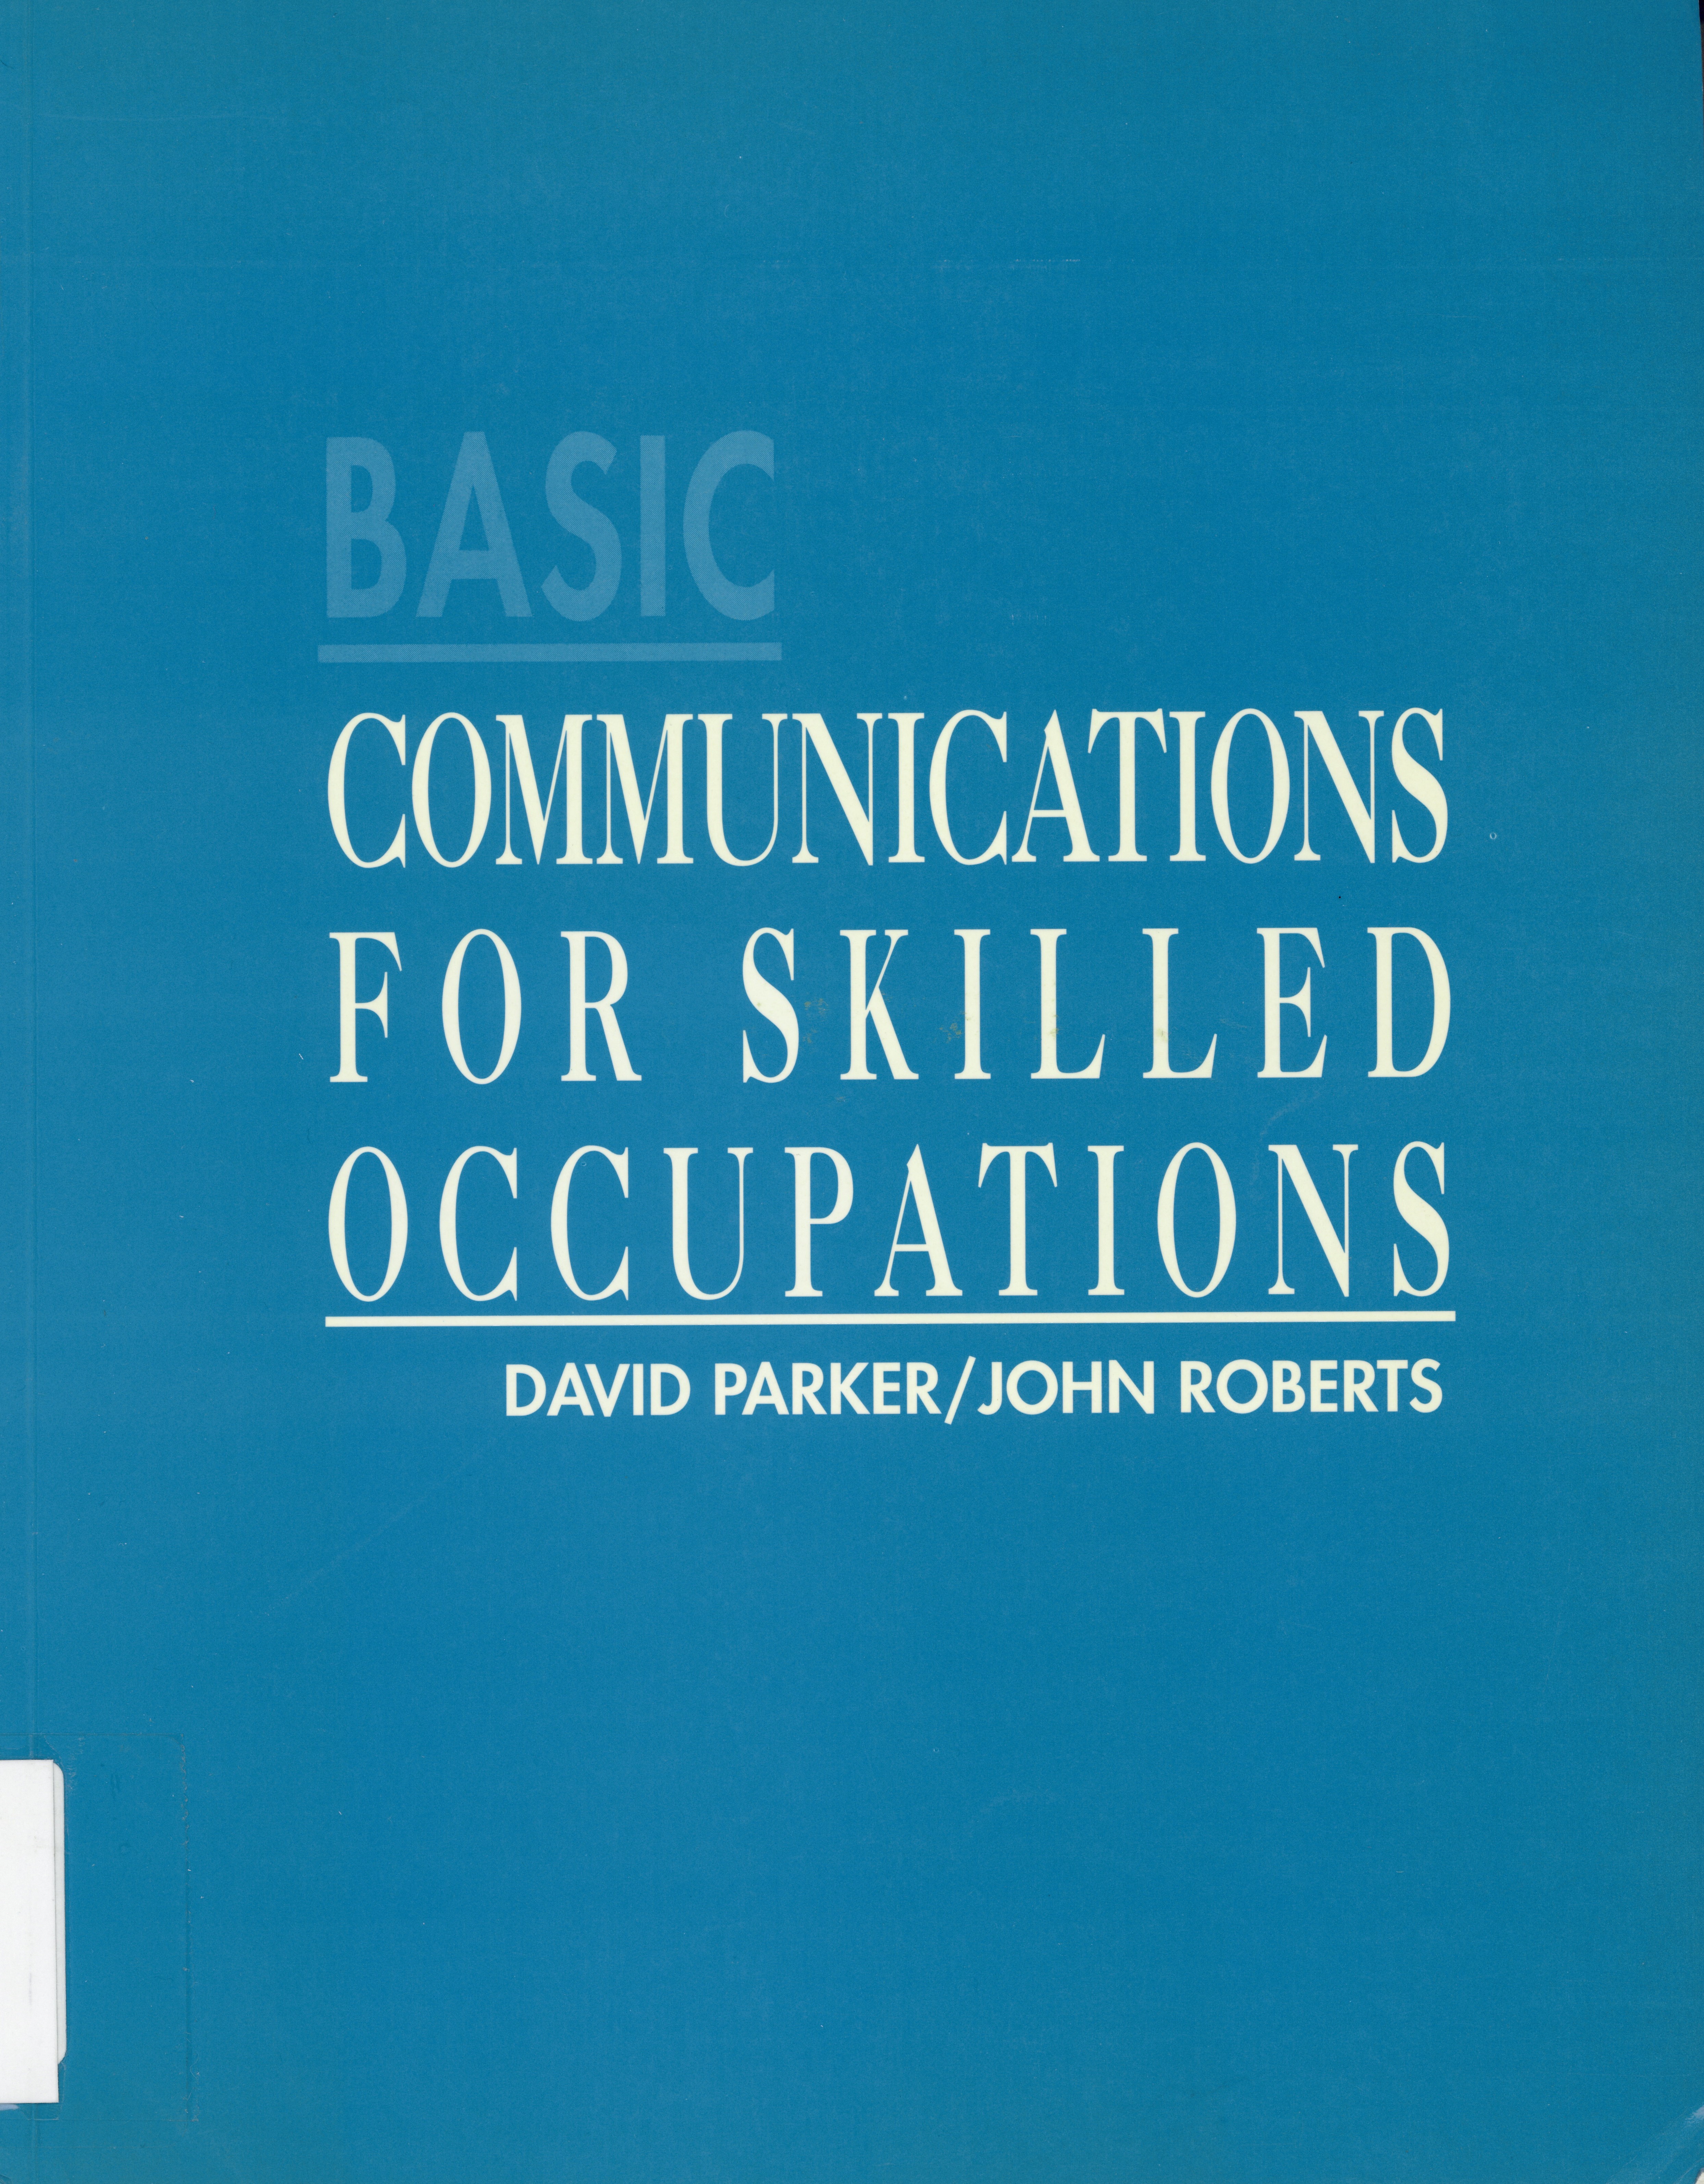 Basic communications for skilled occupations